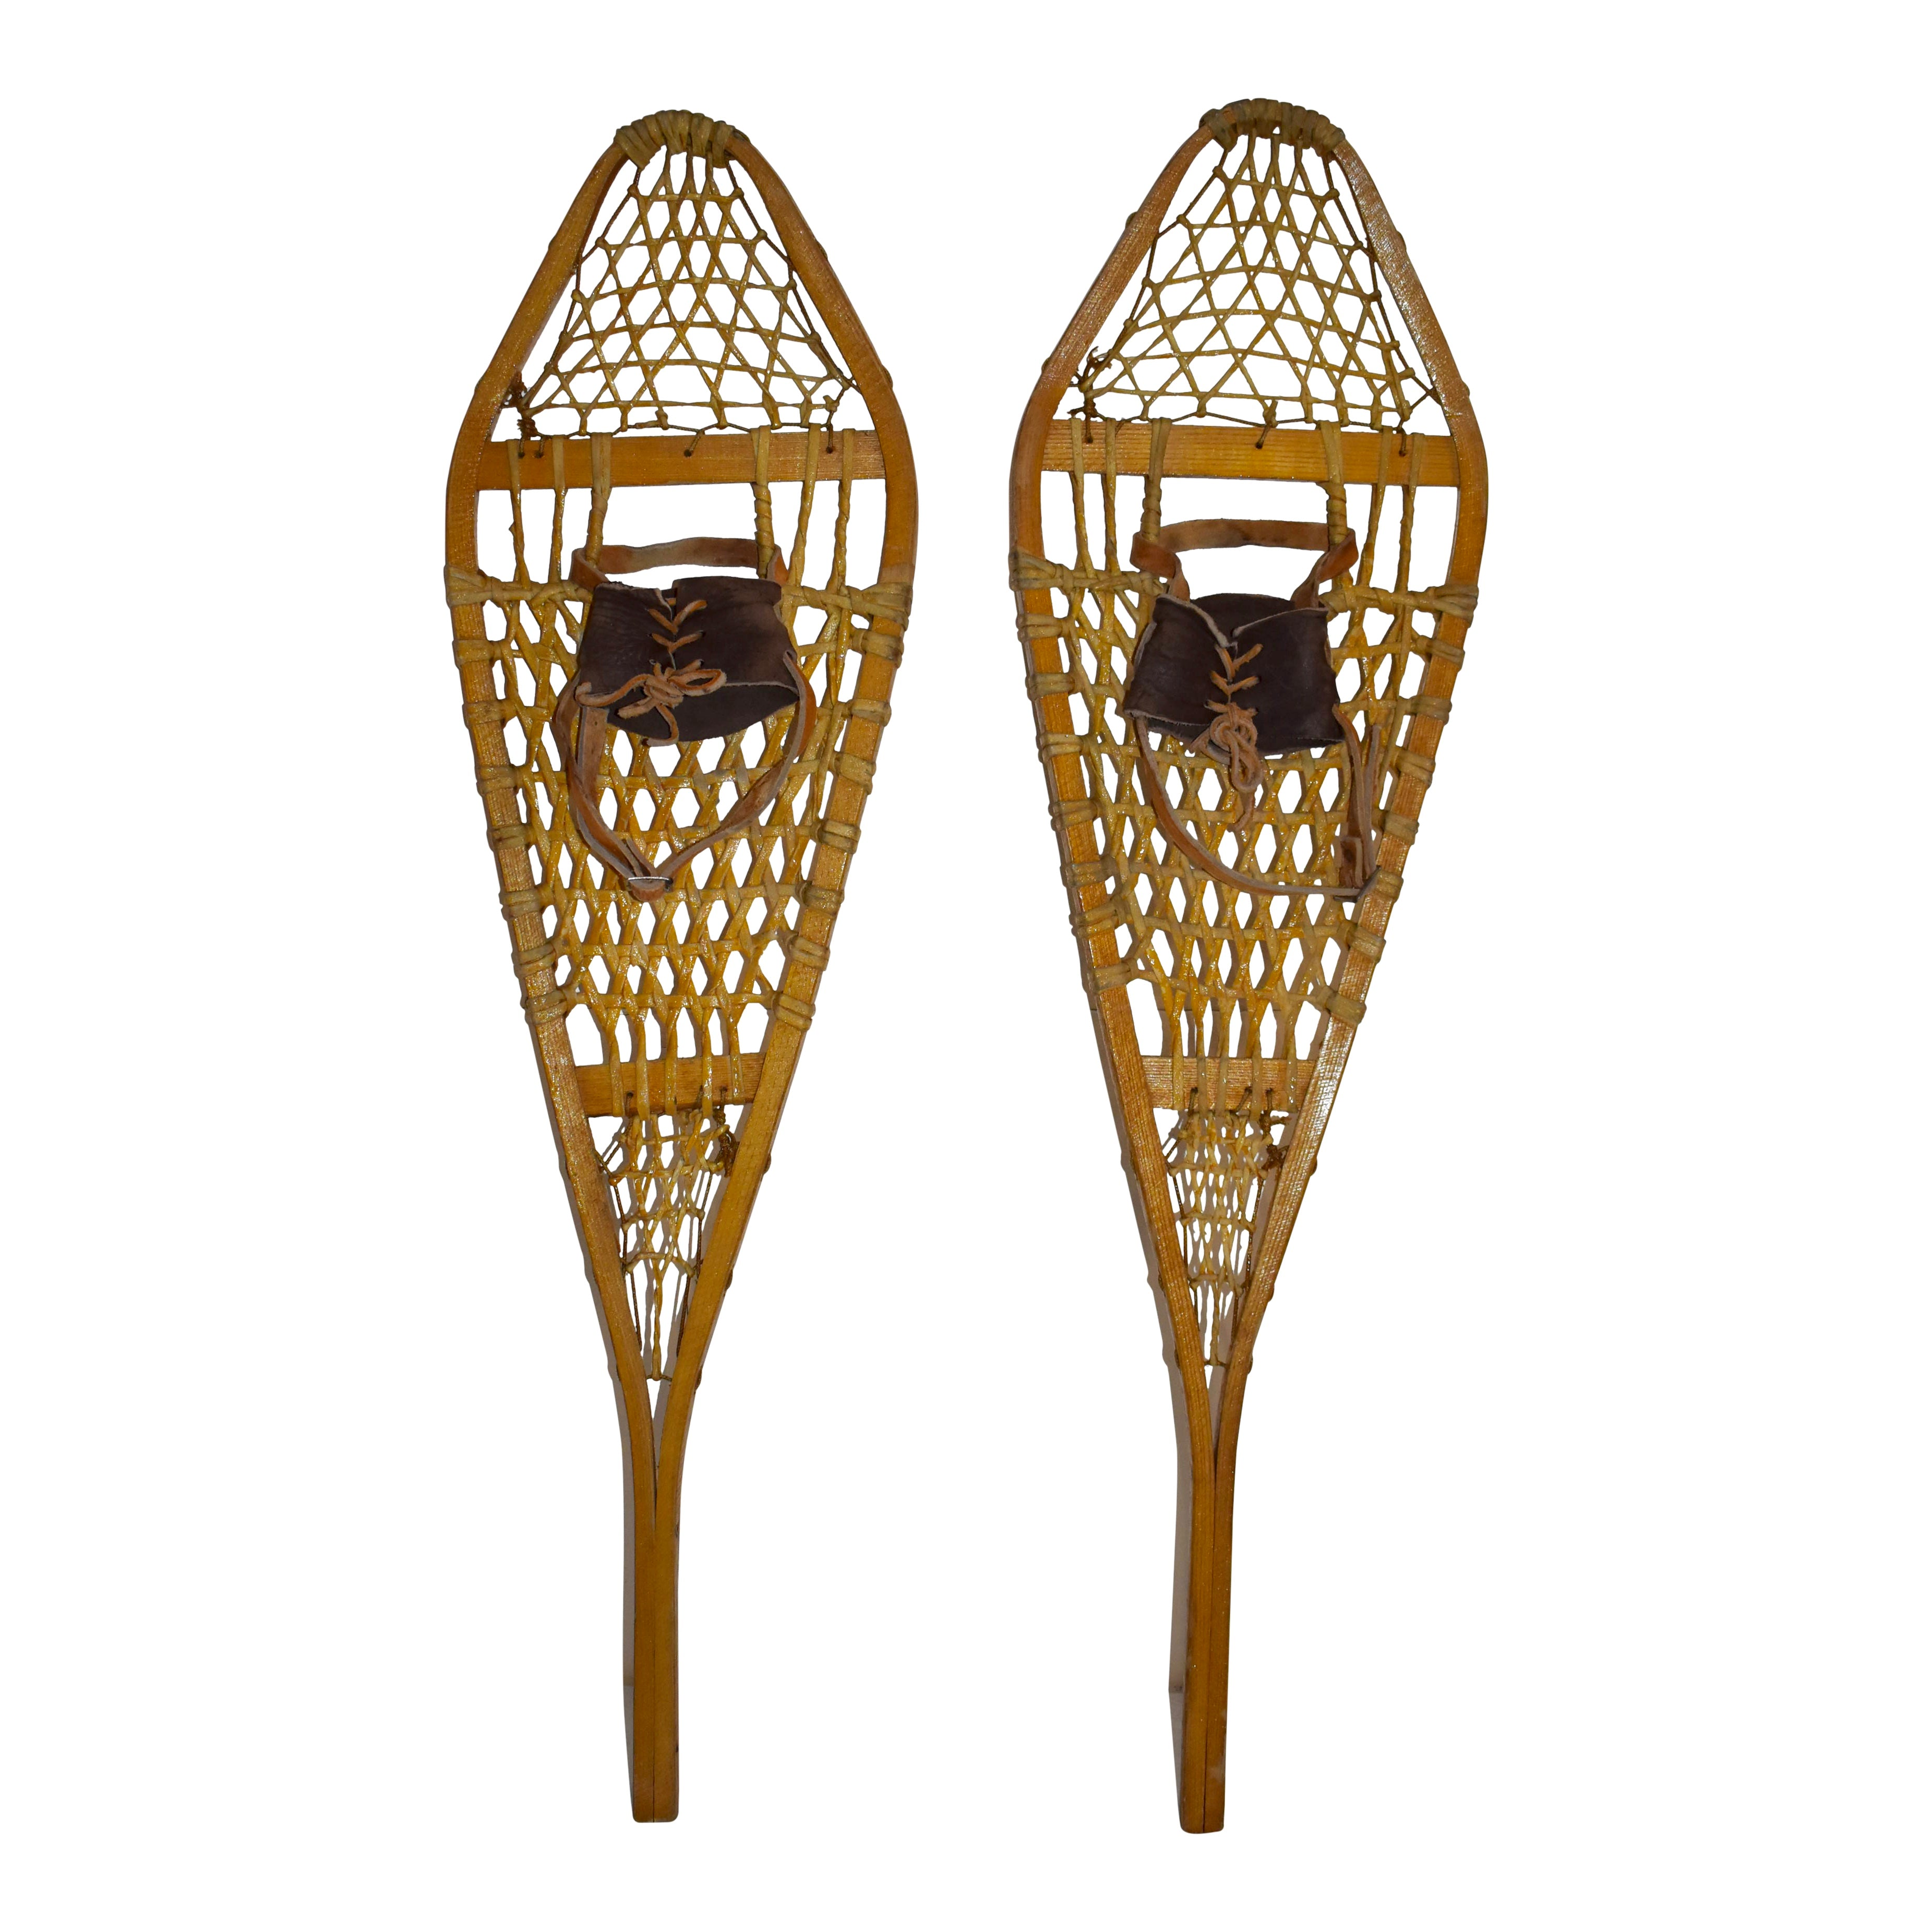 Canadian Huron Snowshoes with Leather Bindings